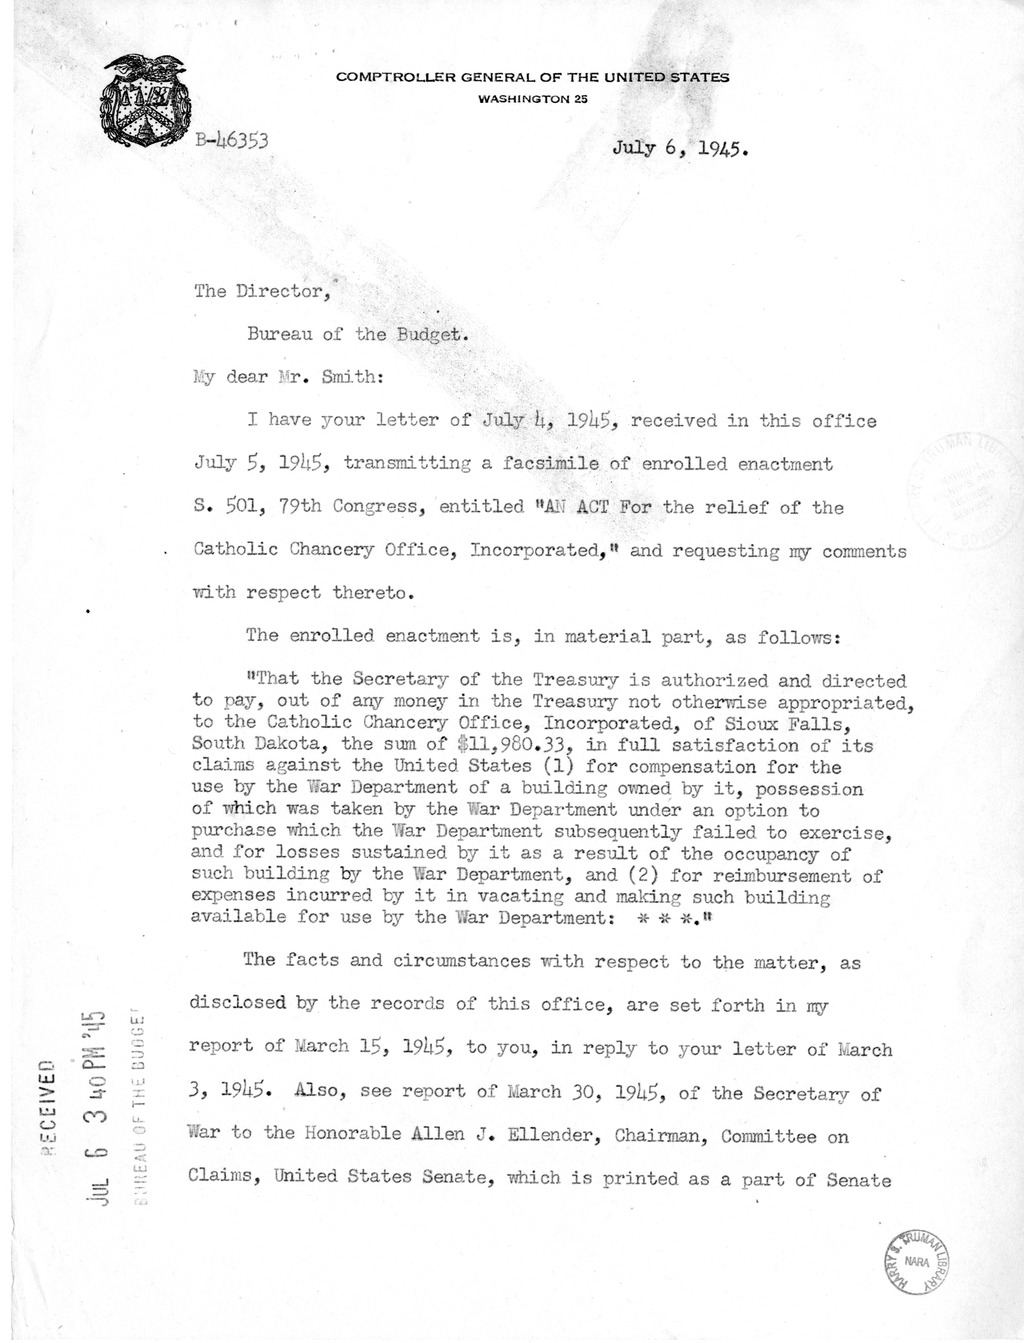 Memorandum from Harold D. Smith to M. C. Latta, S. 501, For the Relief of the Catholic Chancery Office, Incorporated, with Attachments